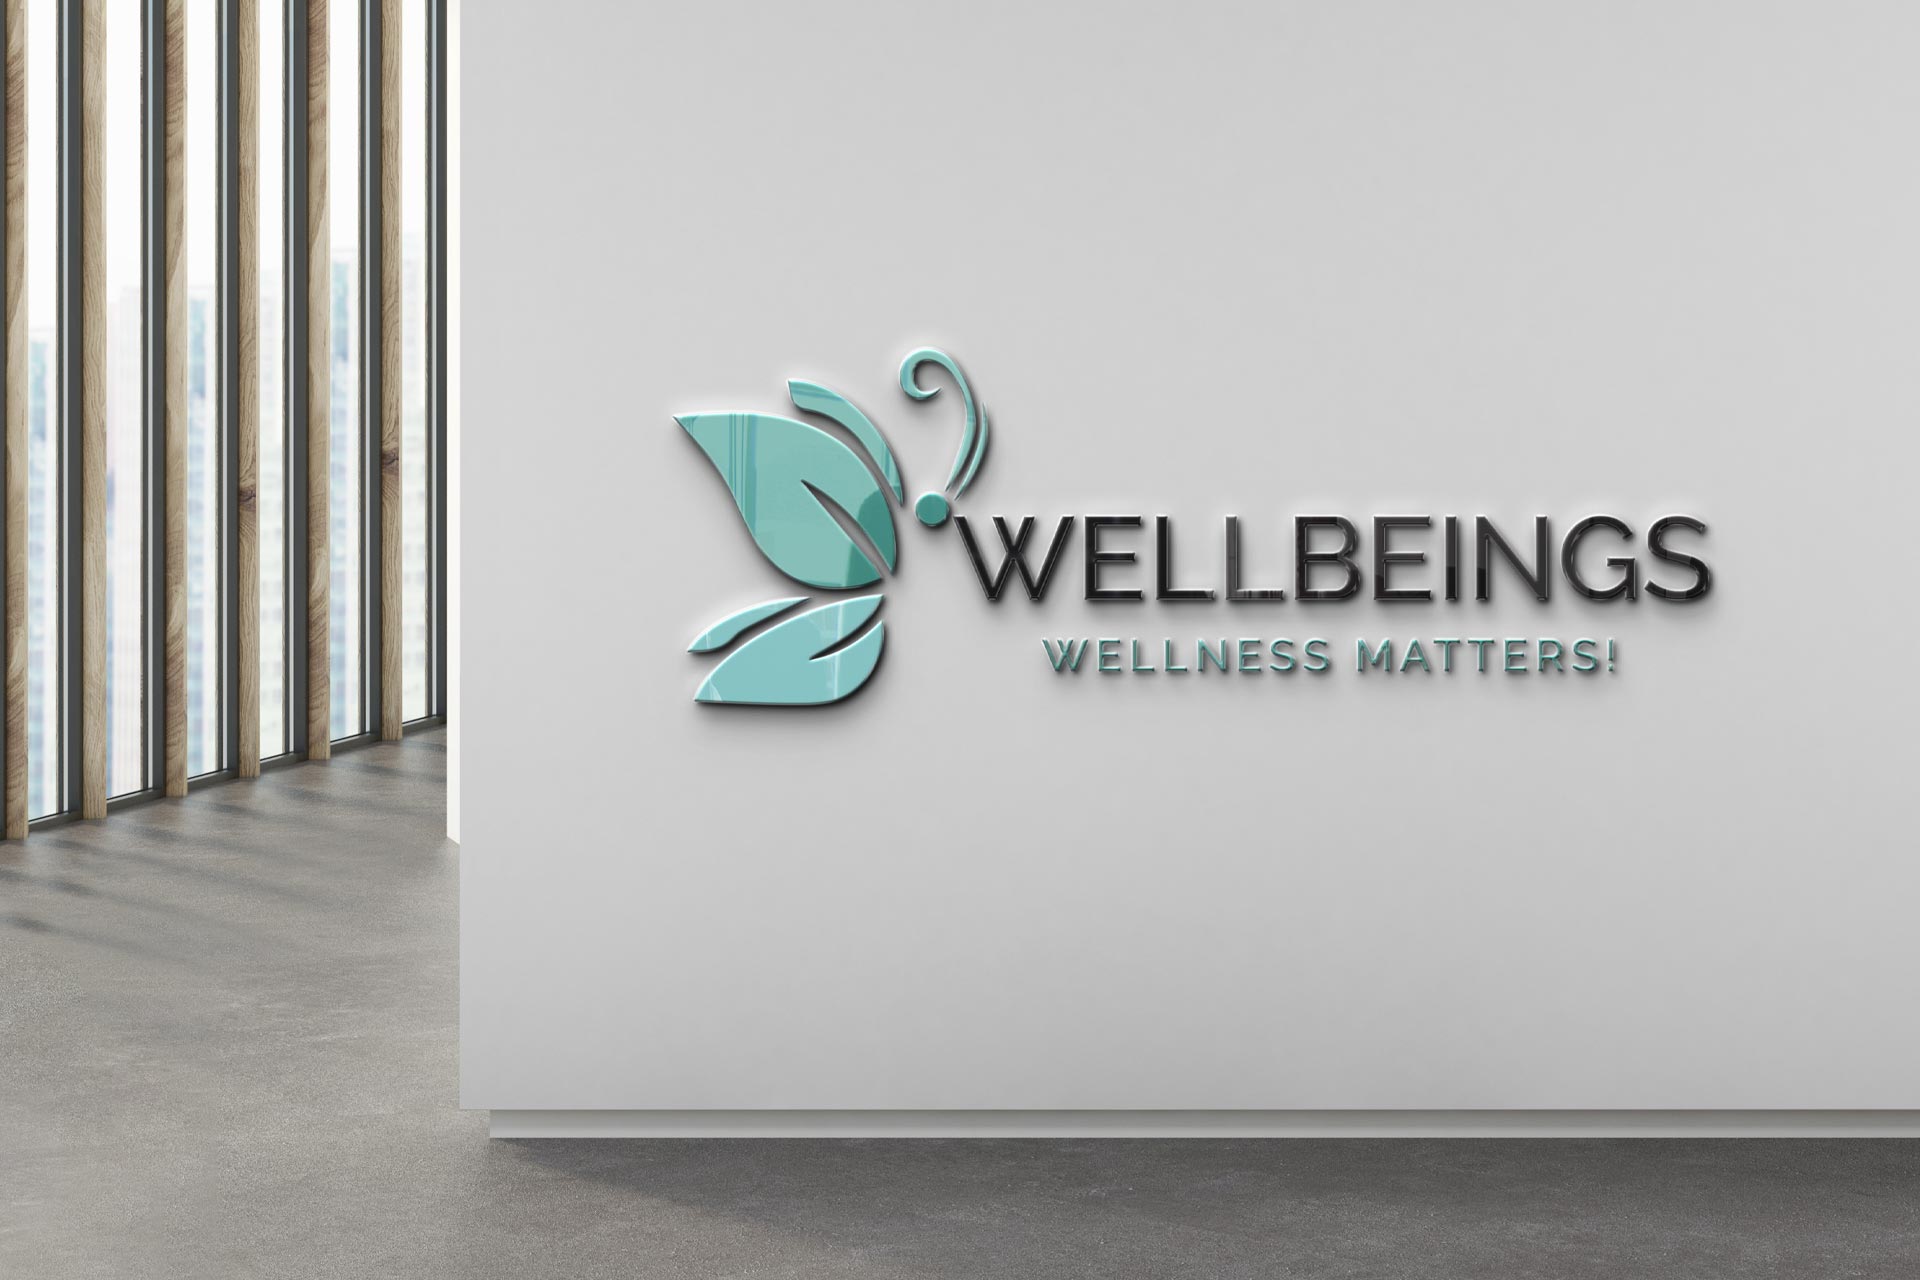 Wellbeing Wellness Matters is a homoeopathy brand based in Noida, Uttar Pradesh. They want their logo to reflect their careful attitude towards their patients. This logo is made with love by CodesGesture, Website Designing company in Gorakhpur.